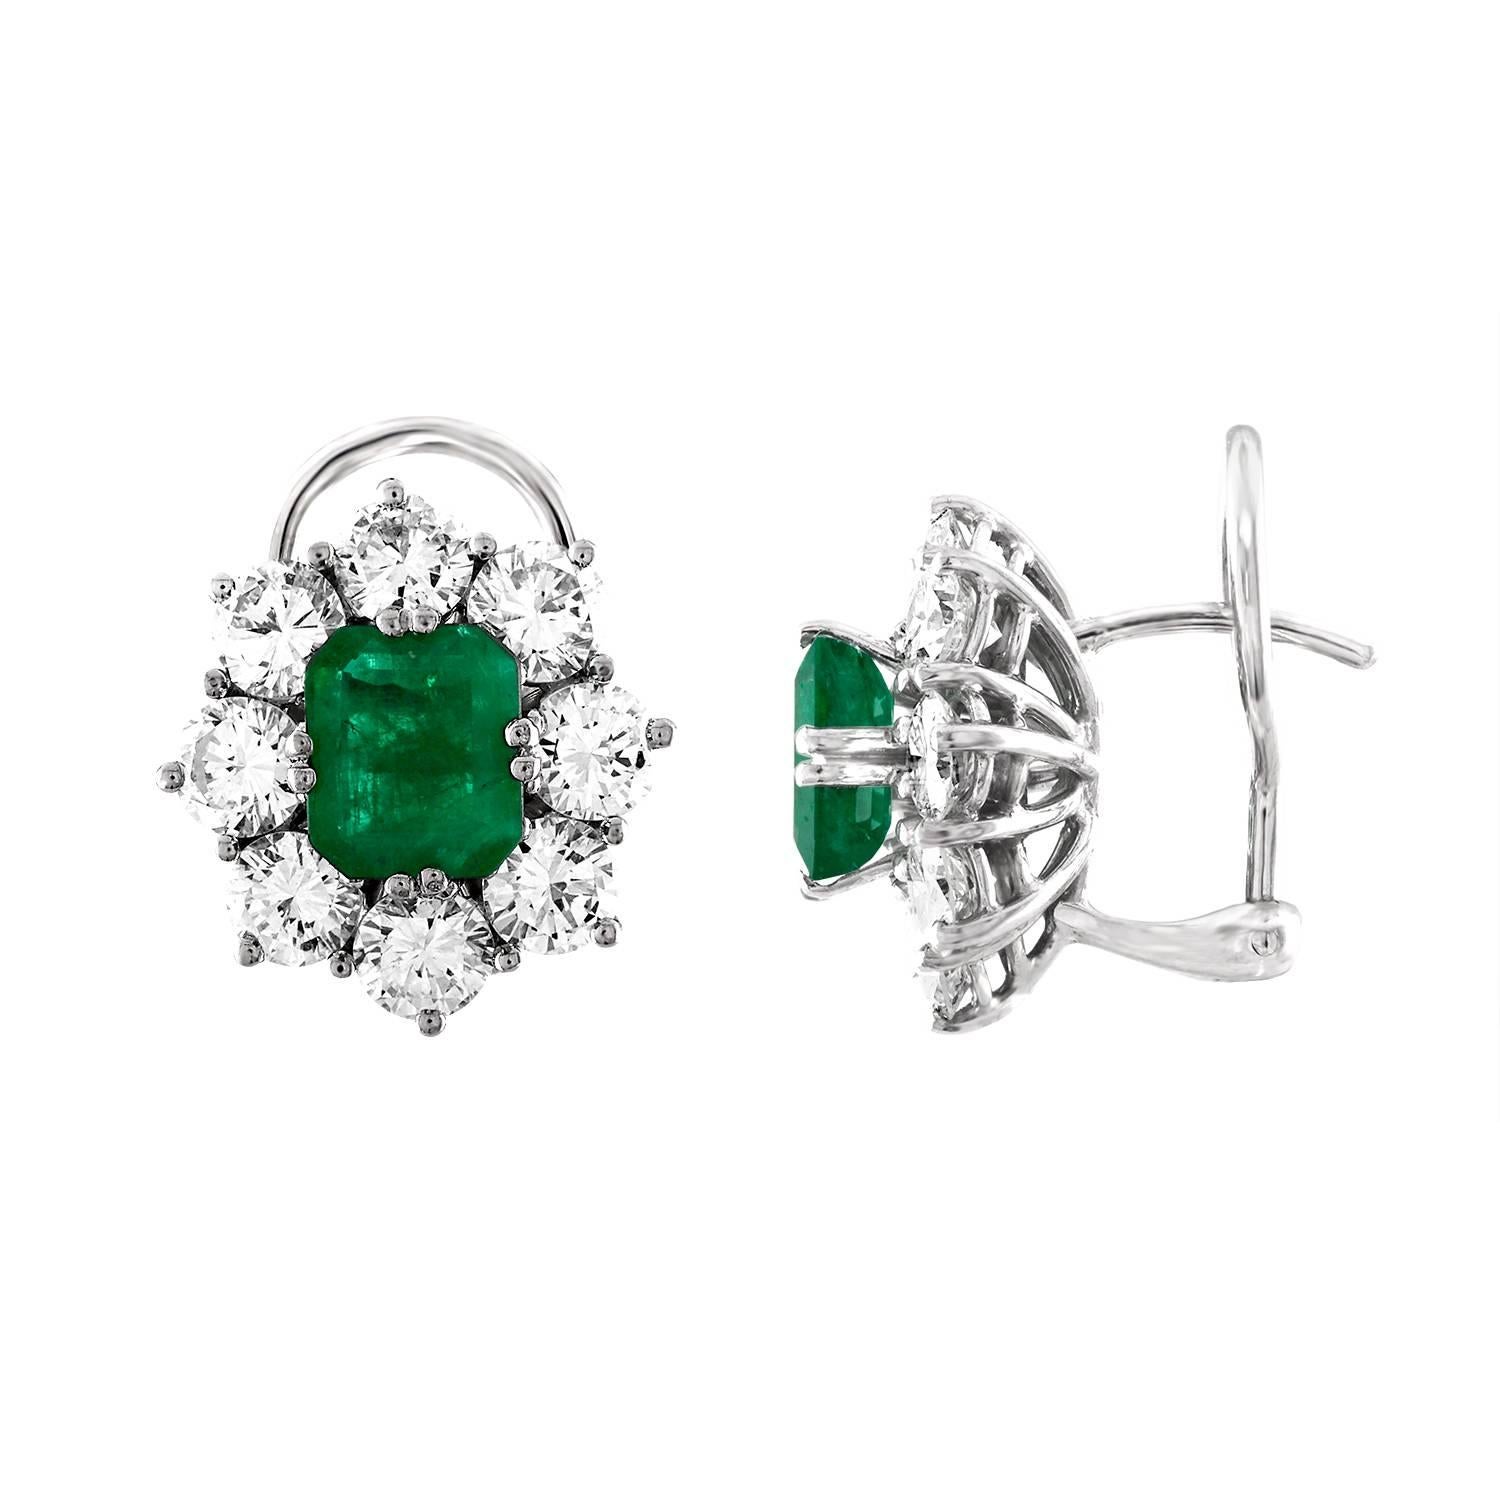 4.00 Carat Diamond and 2.50 Carat Emerald Gold Earrings For Sale